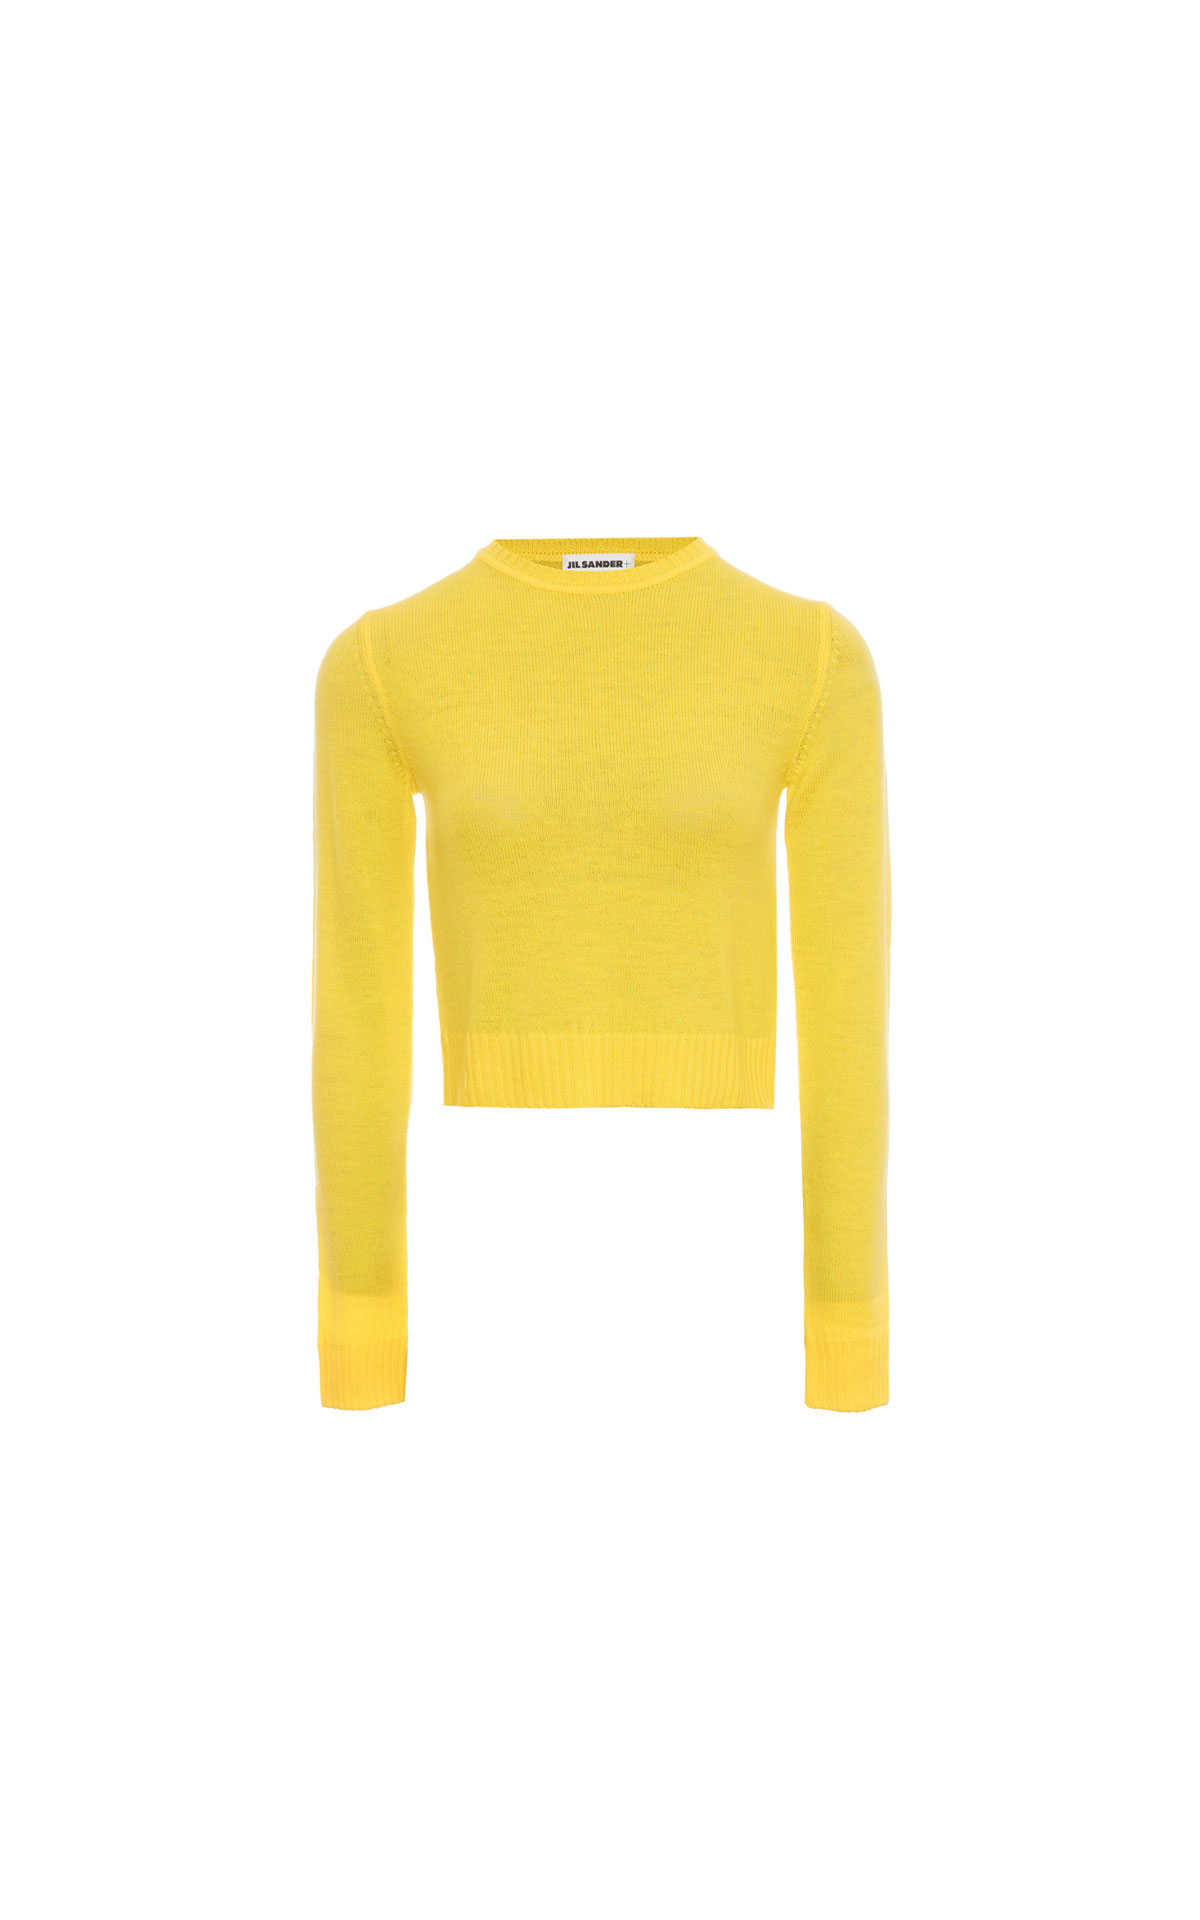 JIL SANDER Yellow sweater from Bicester Village